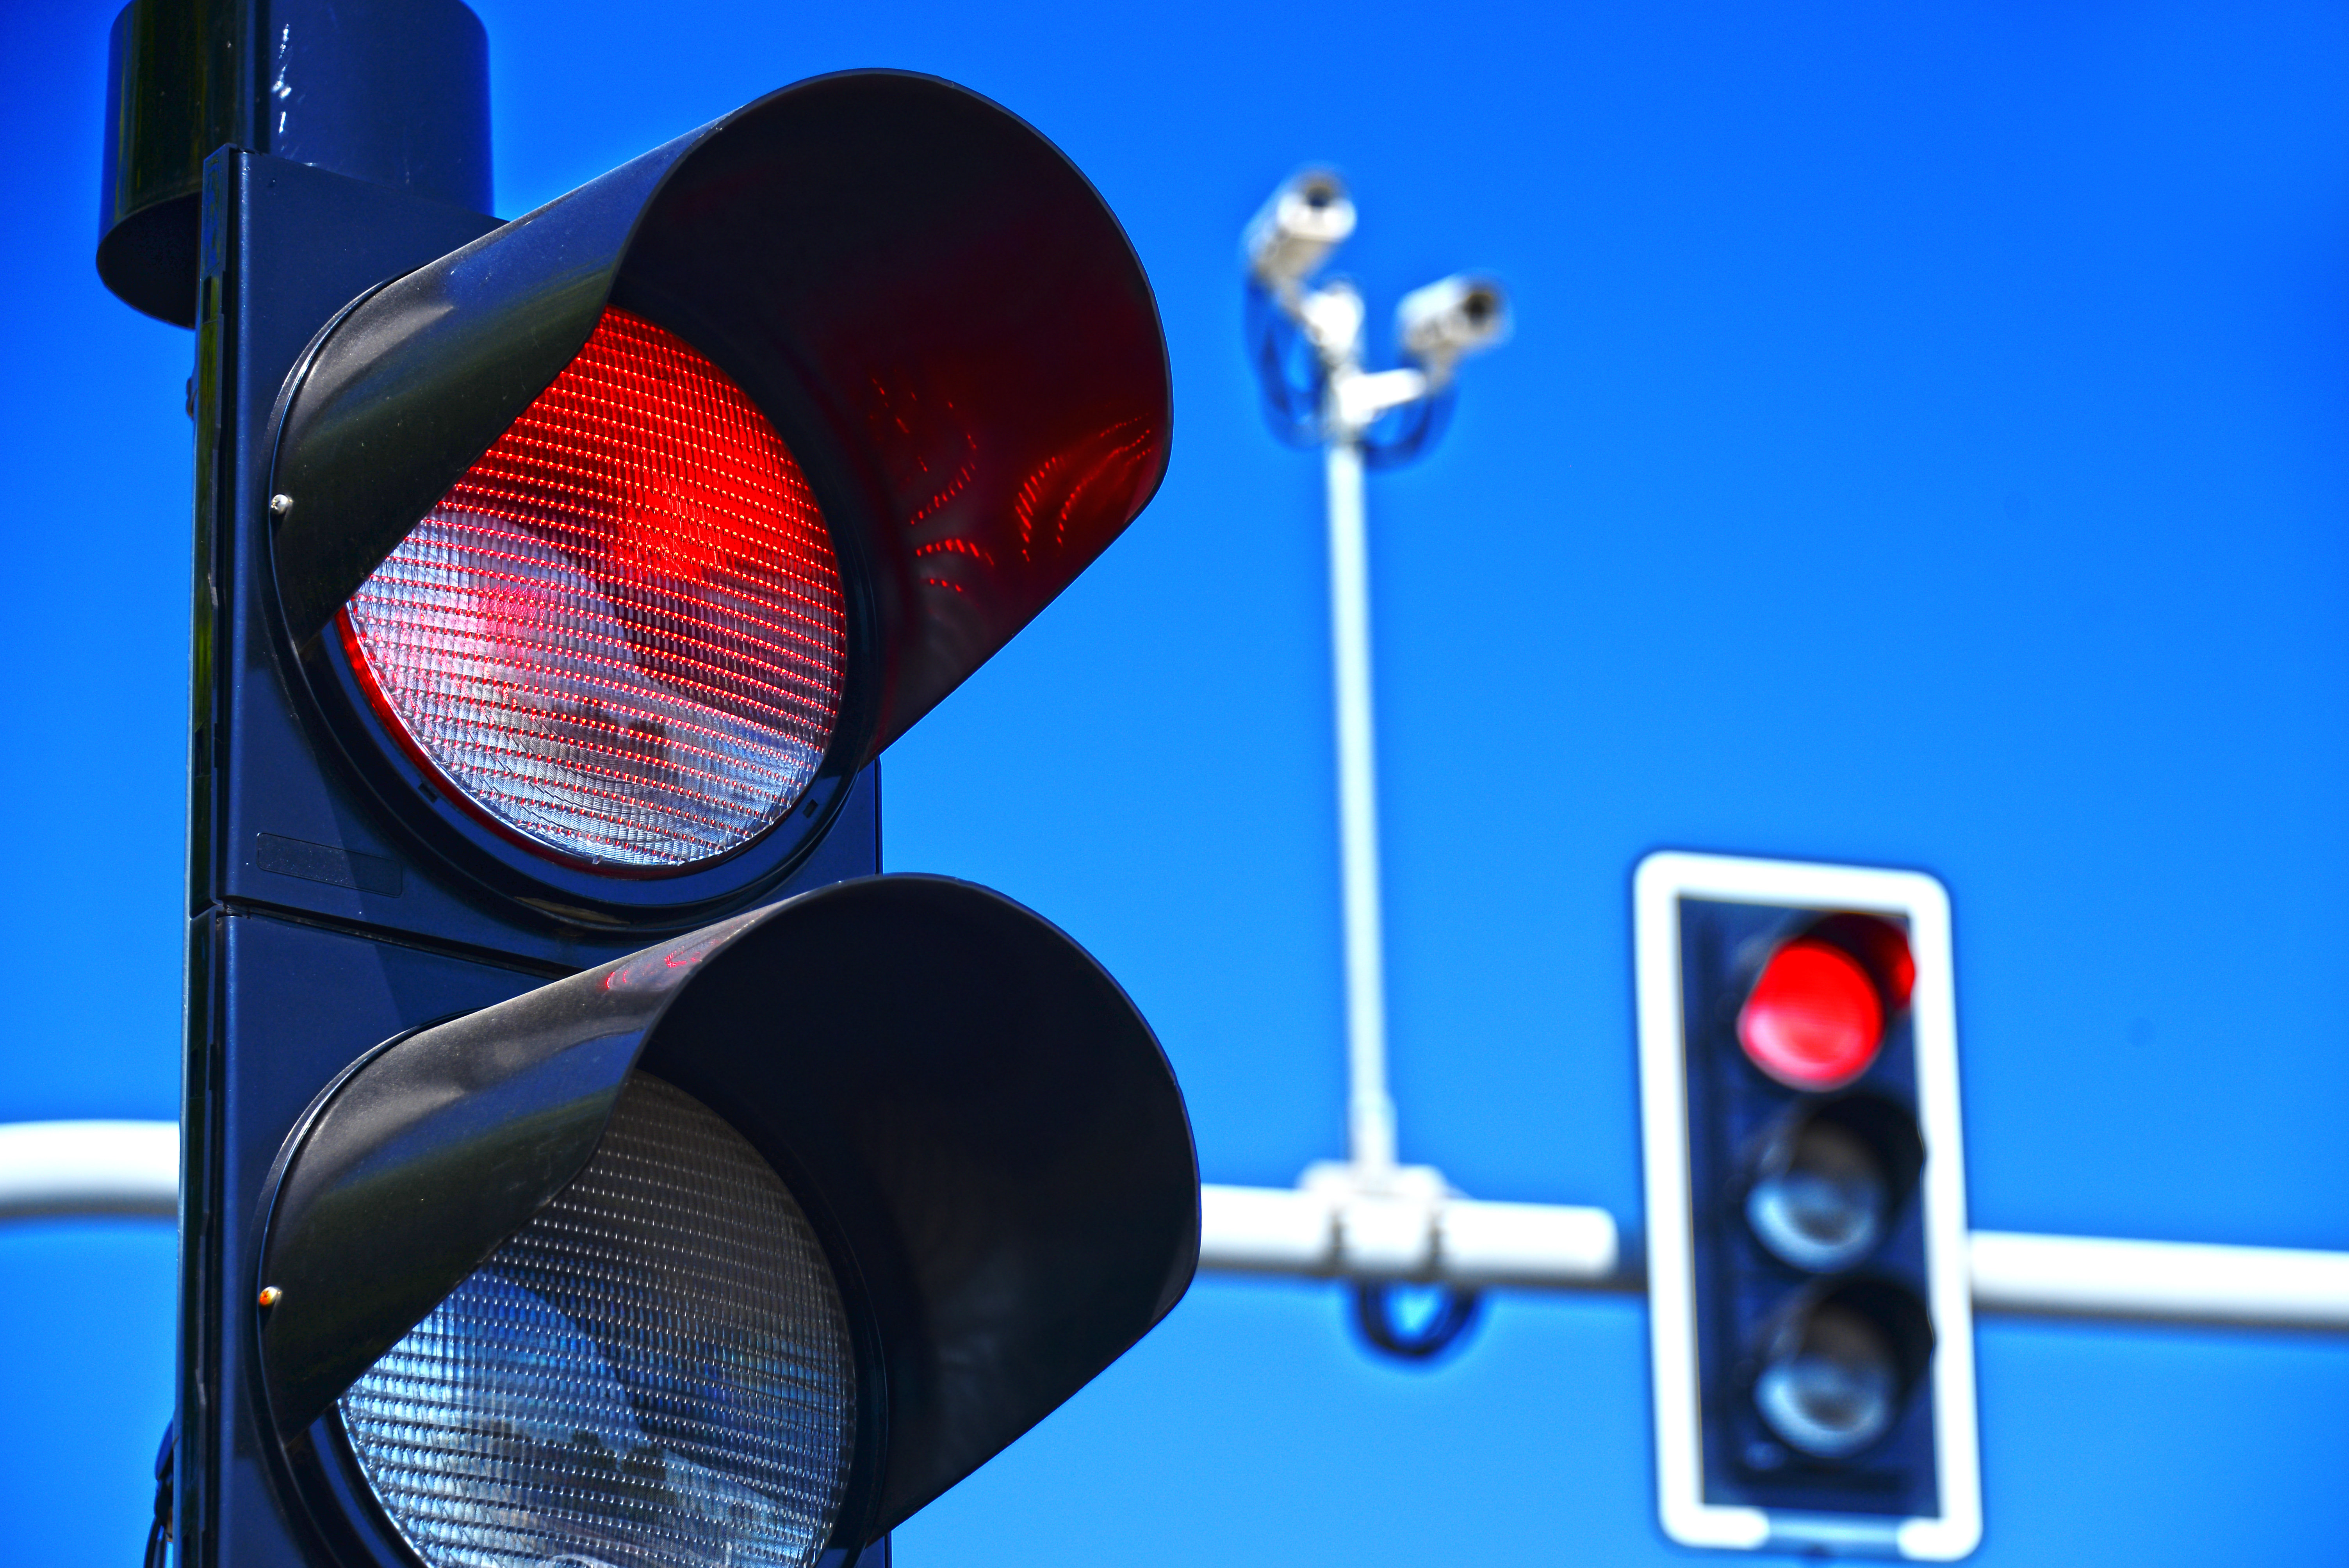 Red-Light Running a Common cause of Devastating Motorcycle Accidents